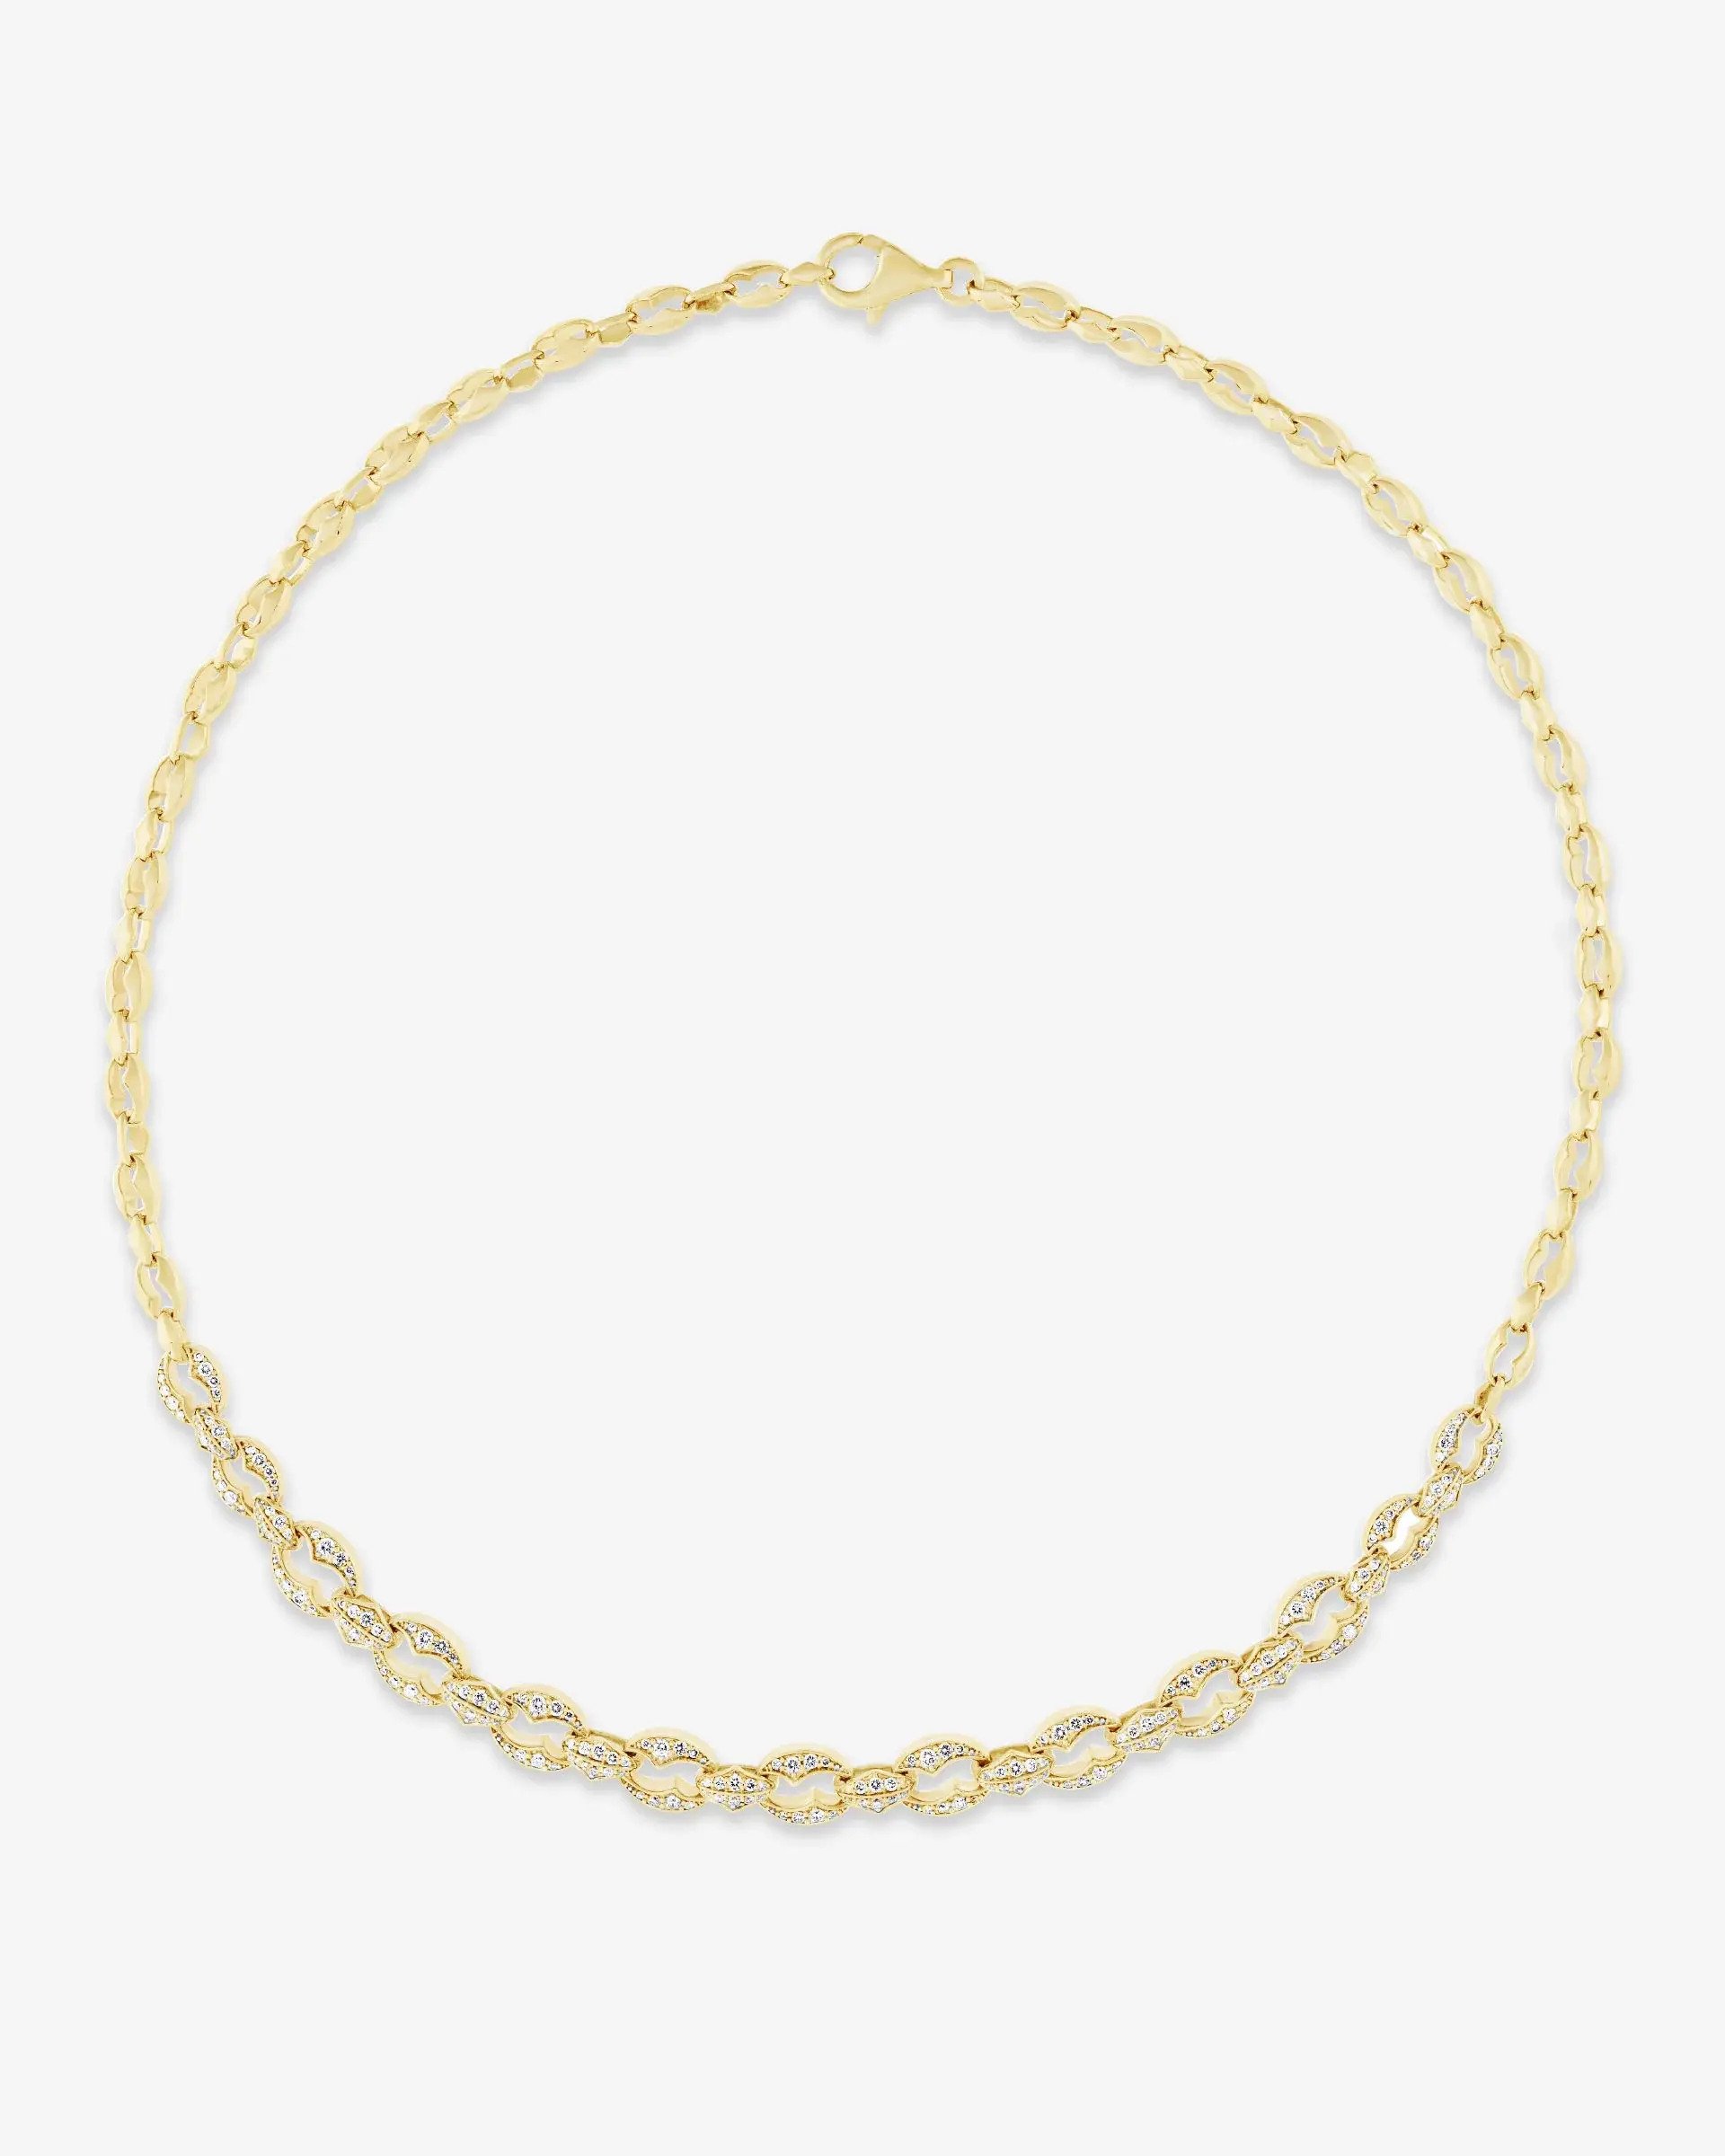 Thorn Embrace Chain Link Choker Necklace with White Diamonds in 18kt Yellow Gold